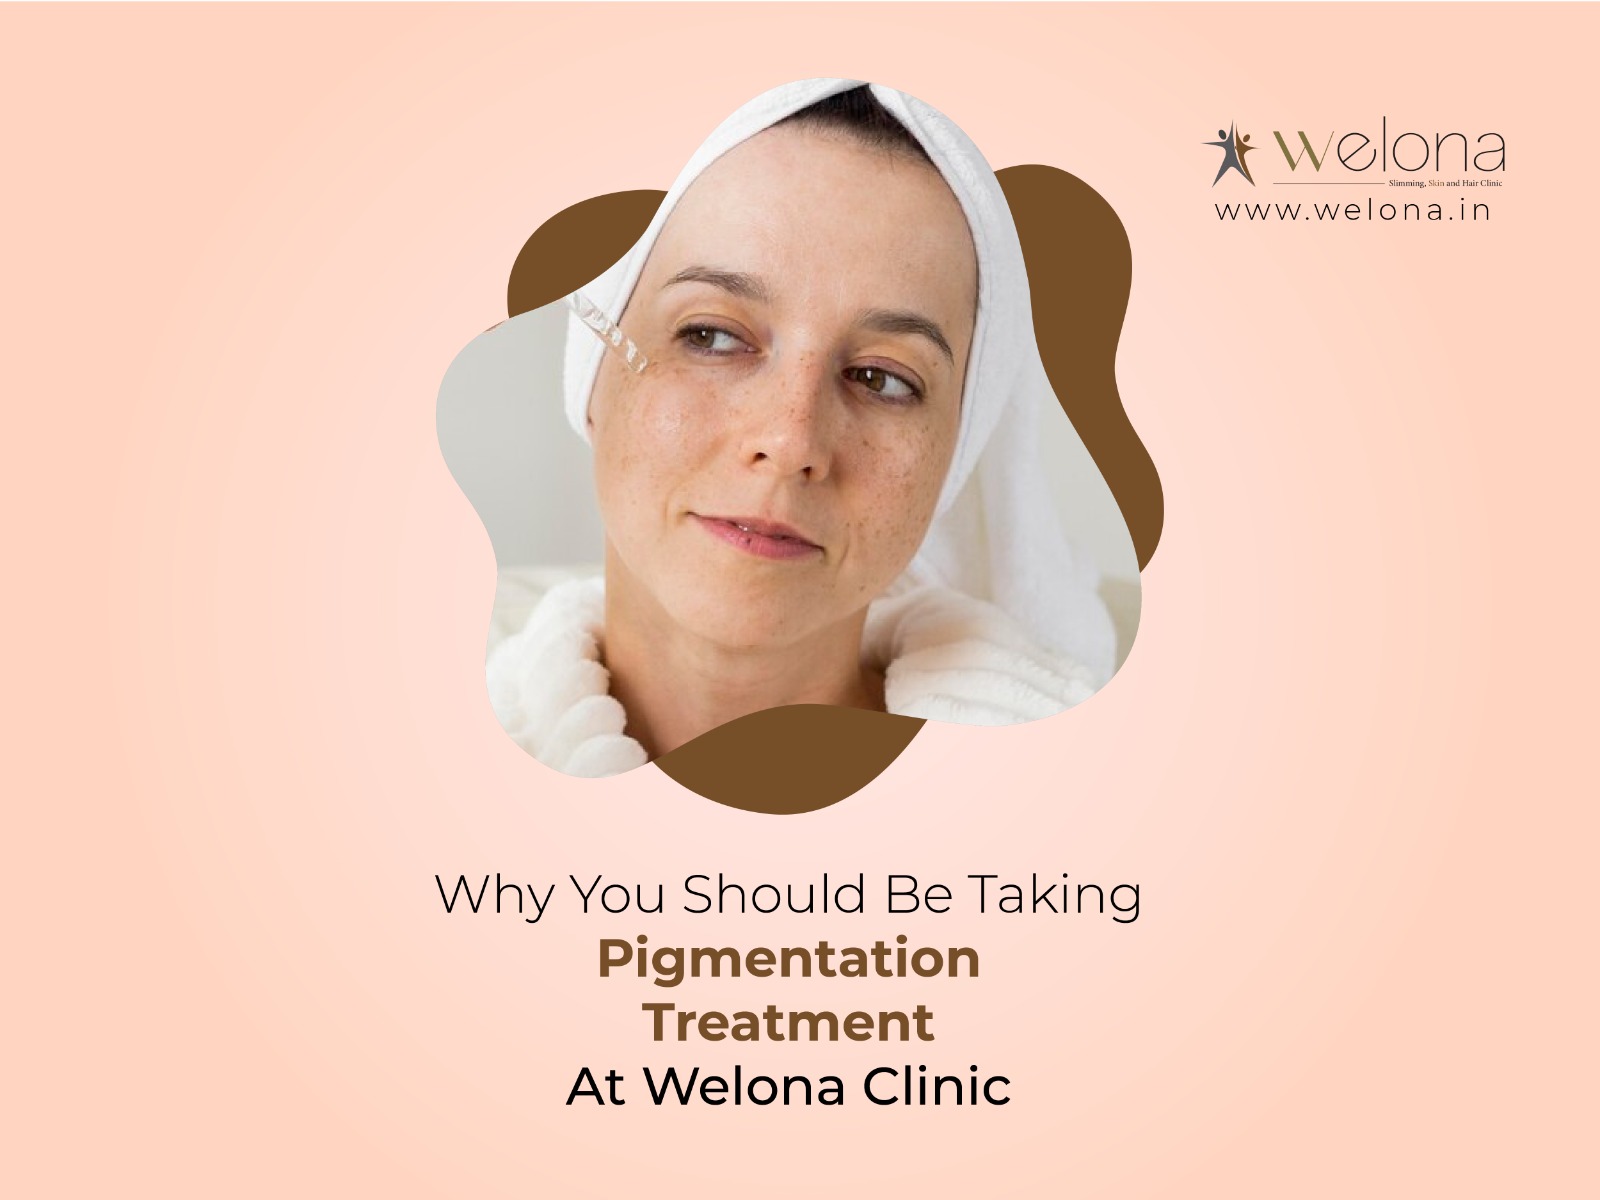 6 Pigmentation Treatment At Welona For a Flawless Skin